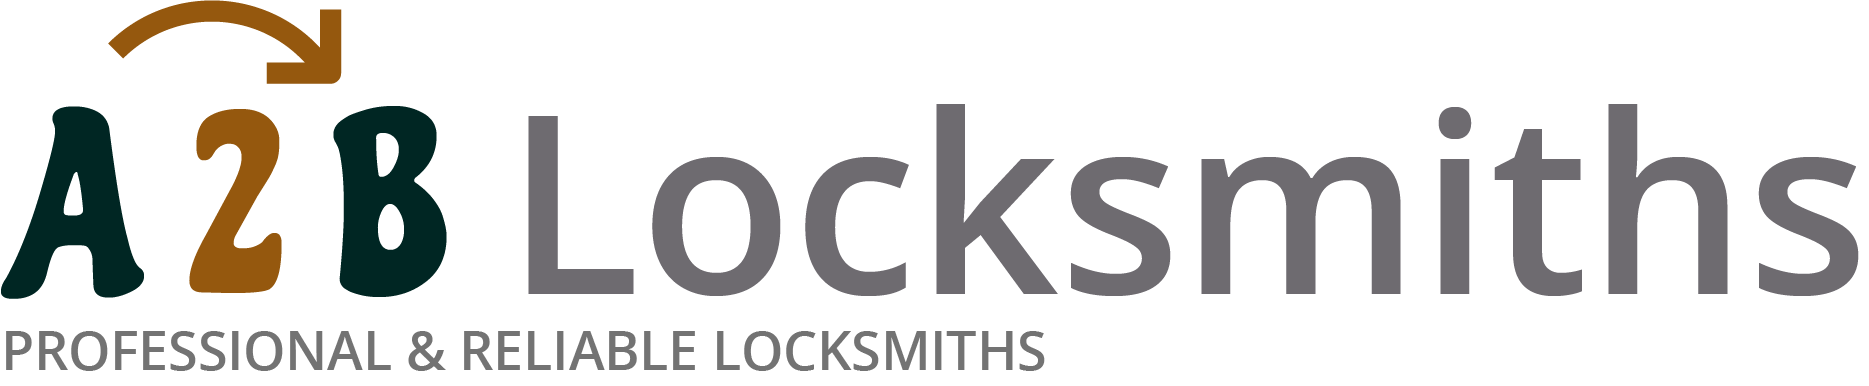 If you are locked out of house in Biggleswade, our 24/7 local emergency locksmith services can help you.